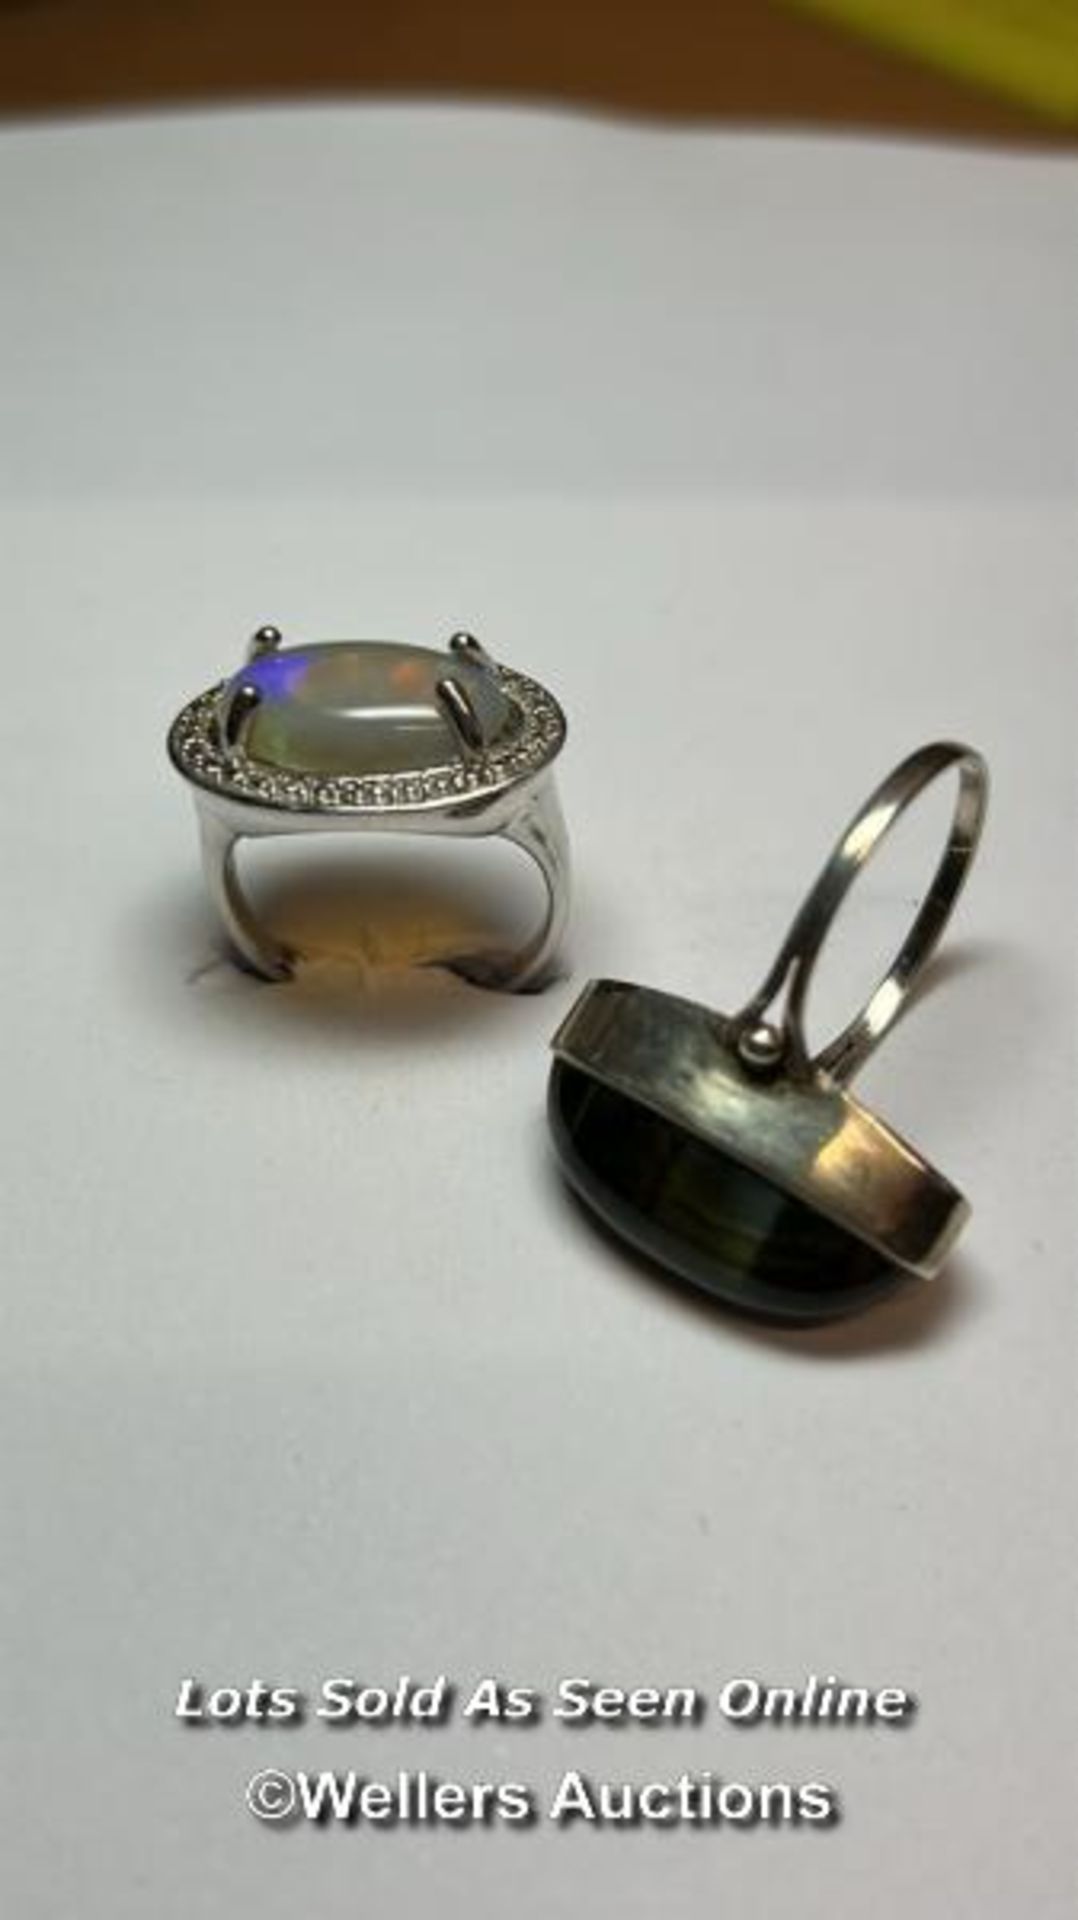 An opel ring in white metal stamped 925 for silver, ring size Q, and a chrysoberyl ring in white